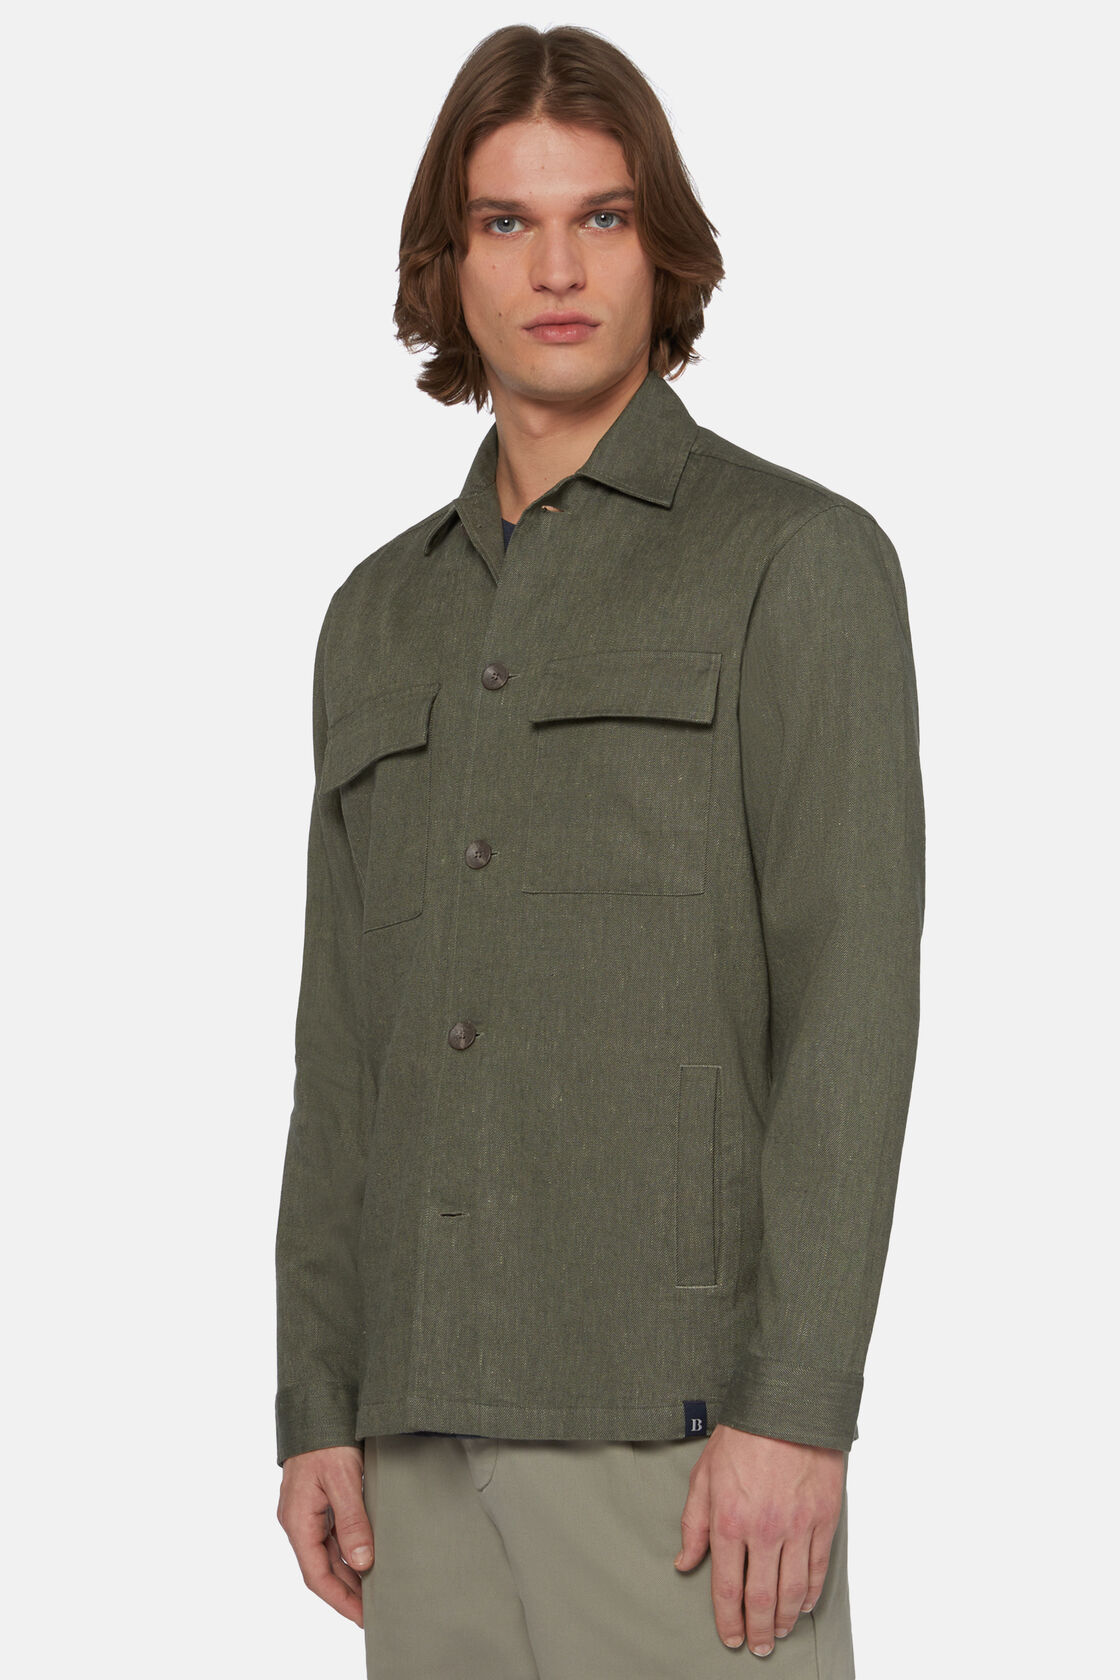 Cotton and Linen Link Shirt Jacket, Military Green, hi-res